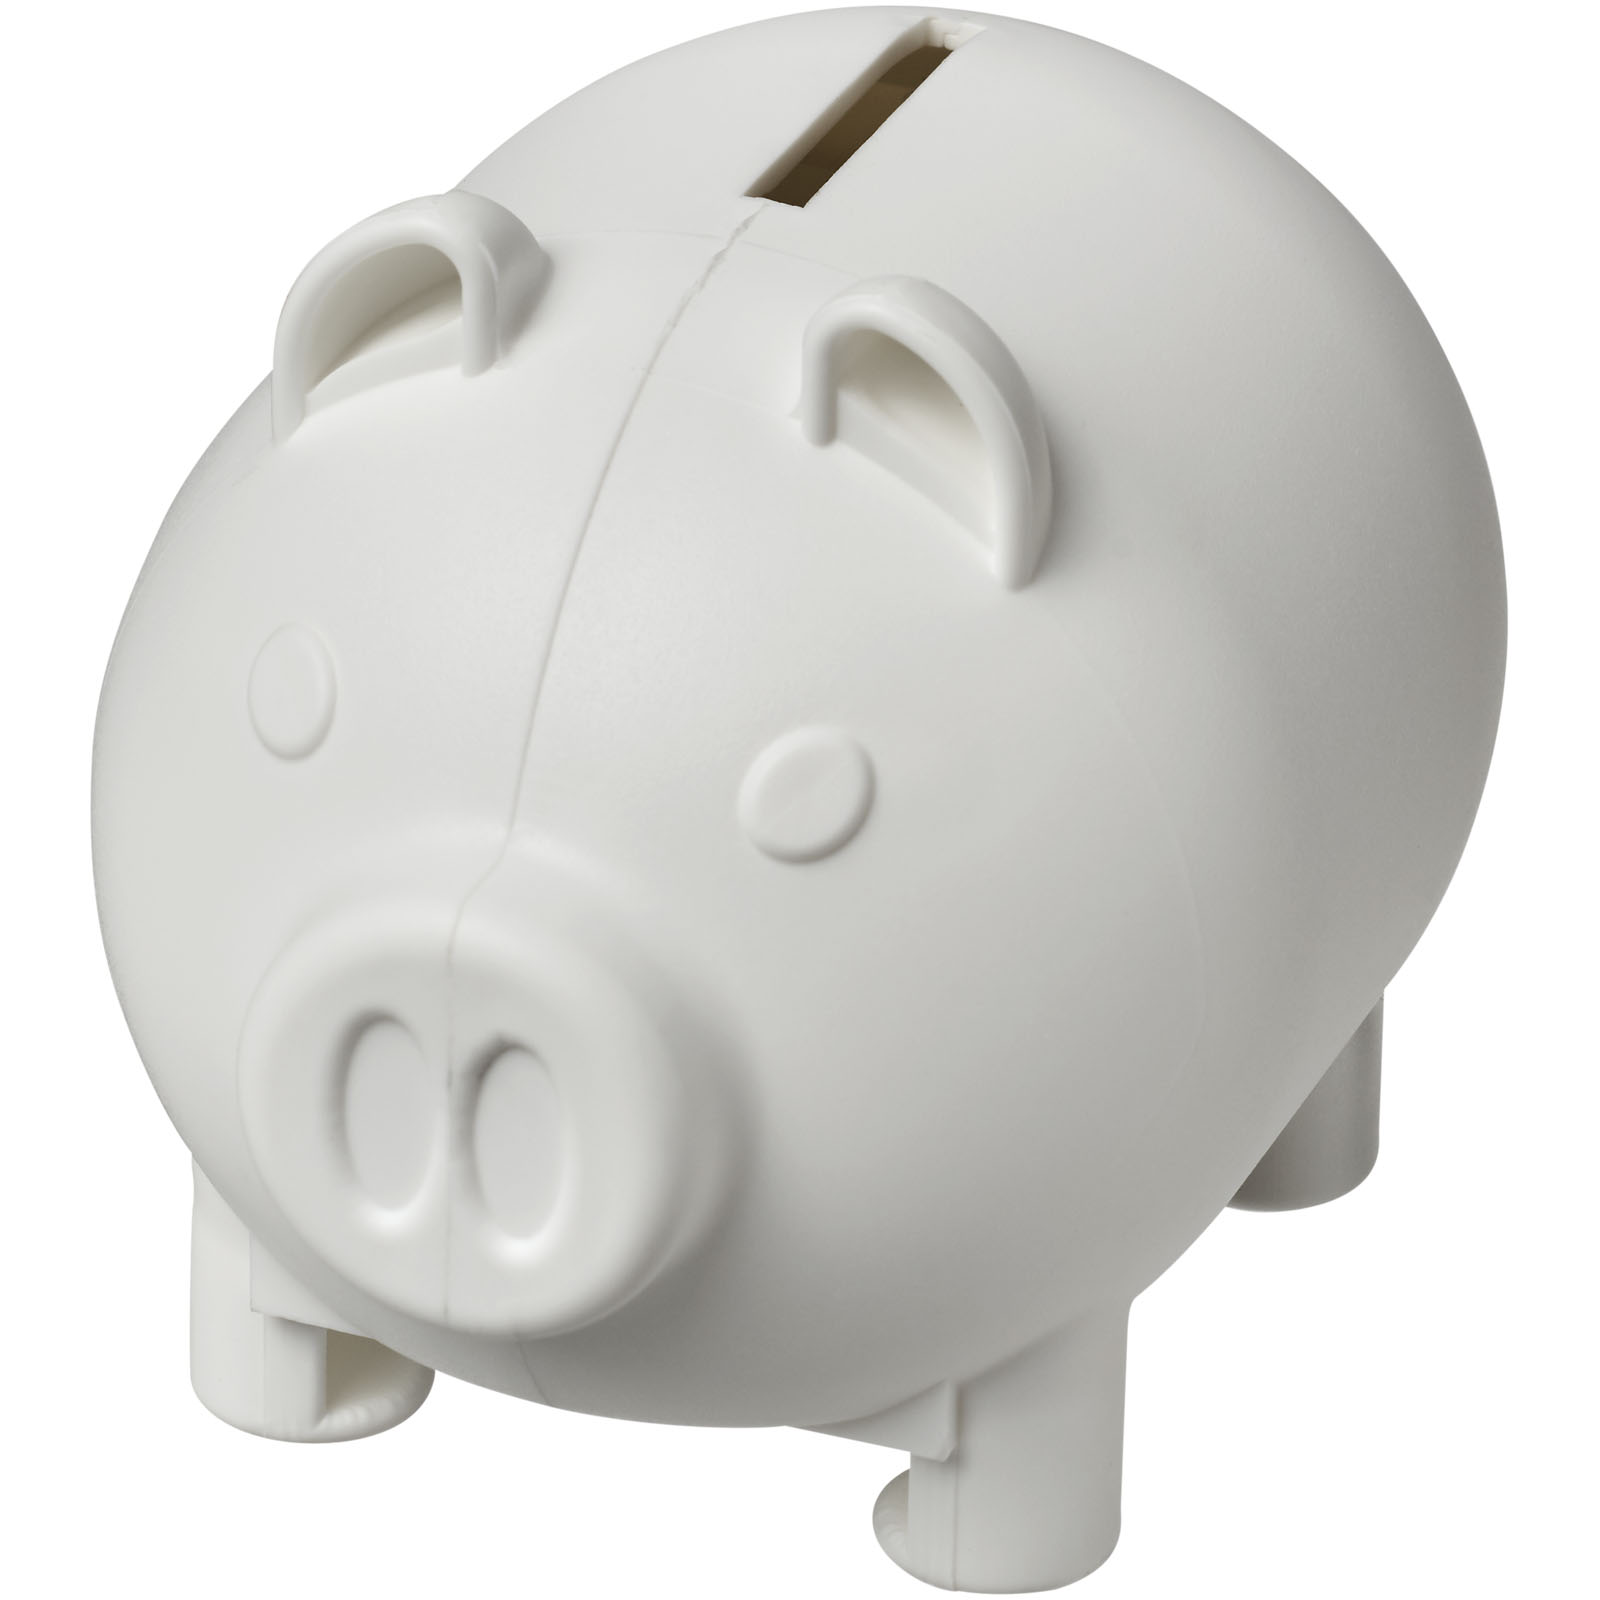 Advertising Home Accessories - Oink recycled plastic piggy bank - 0